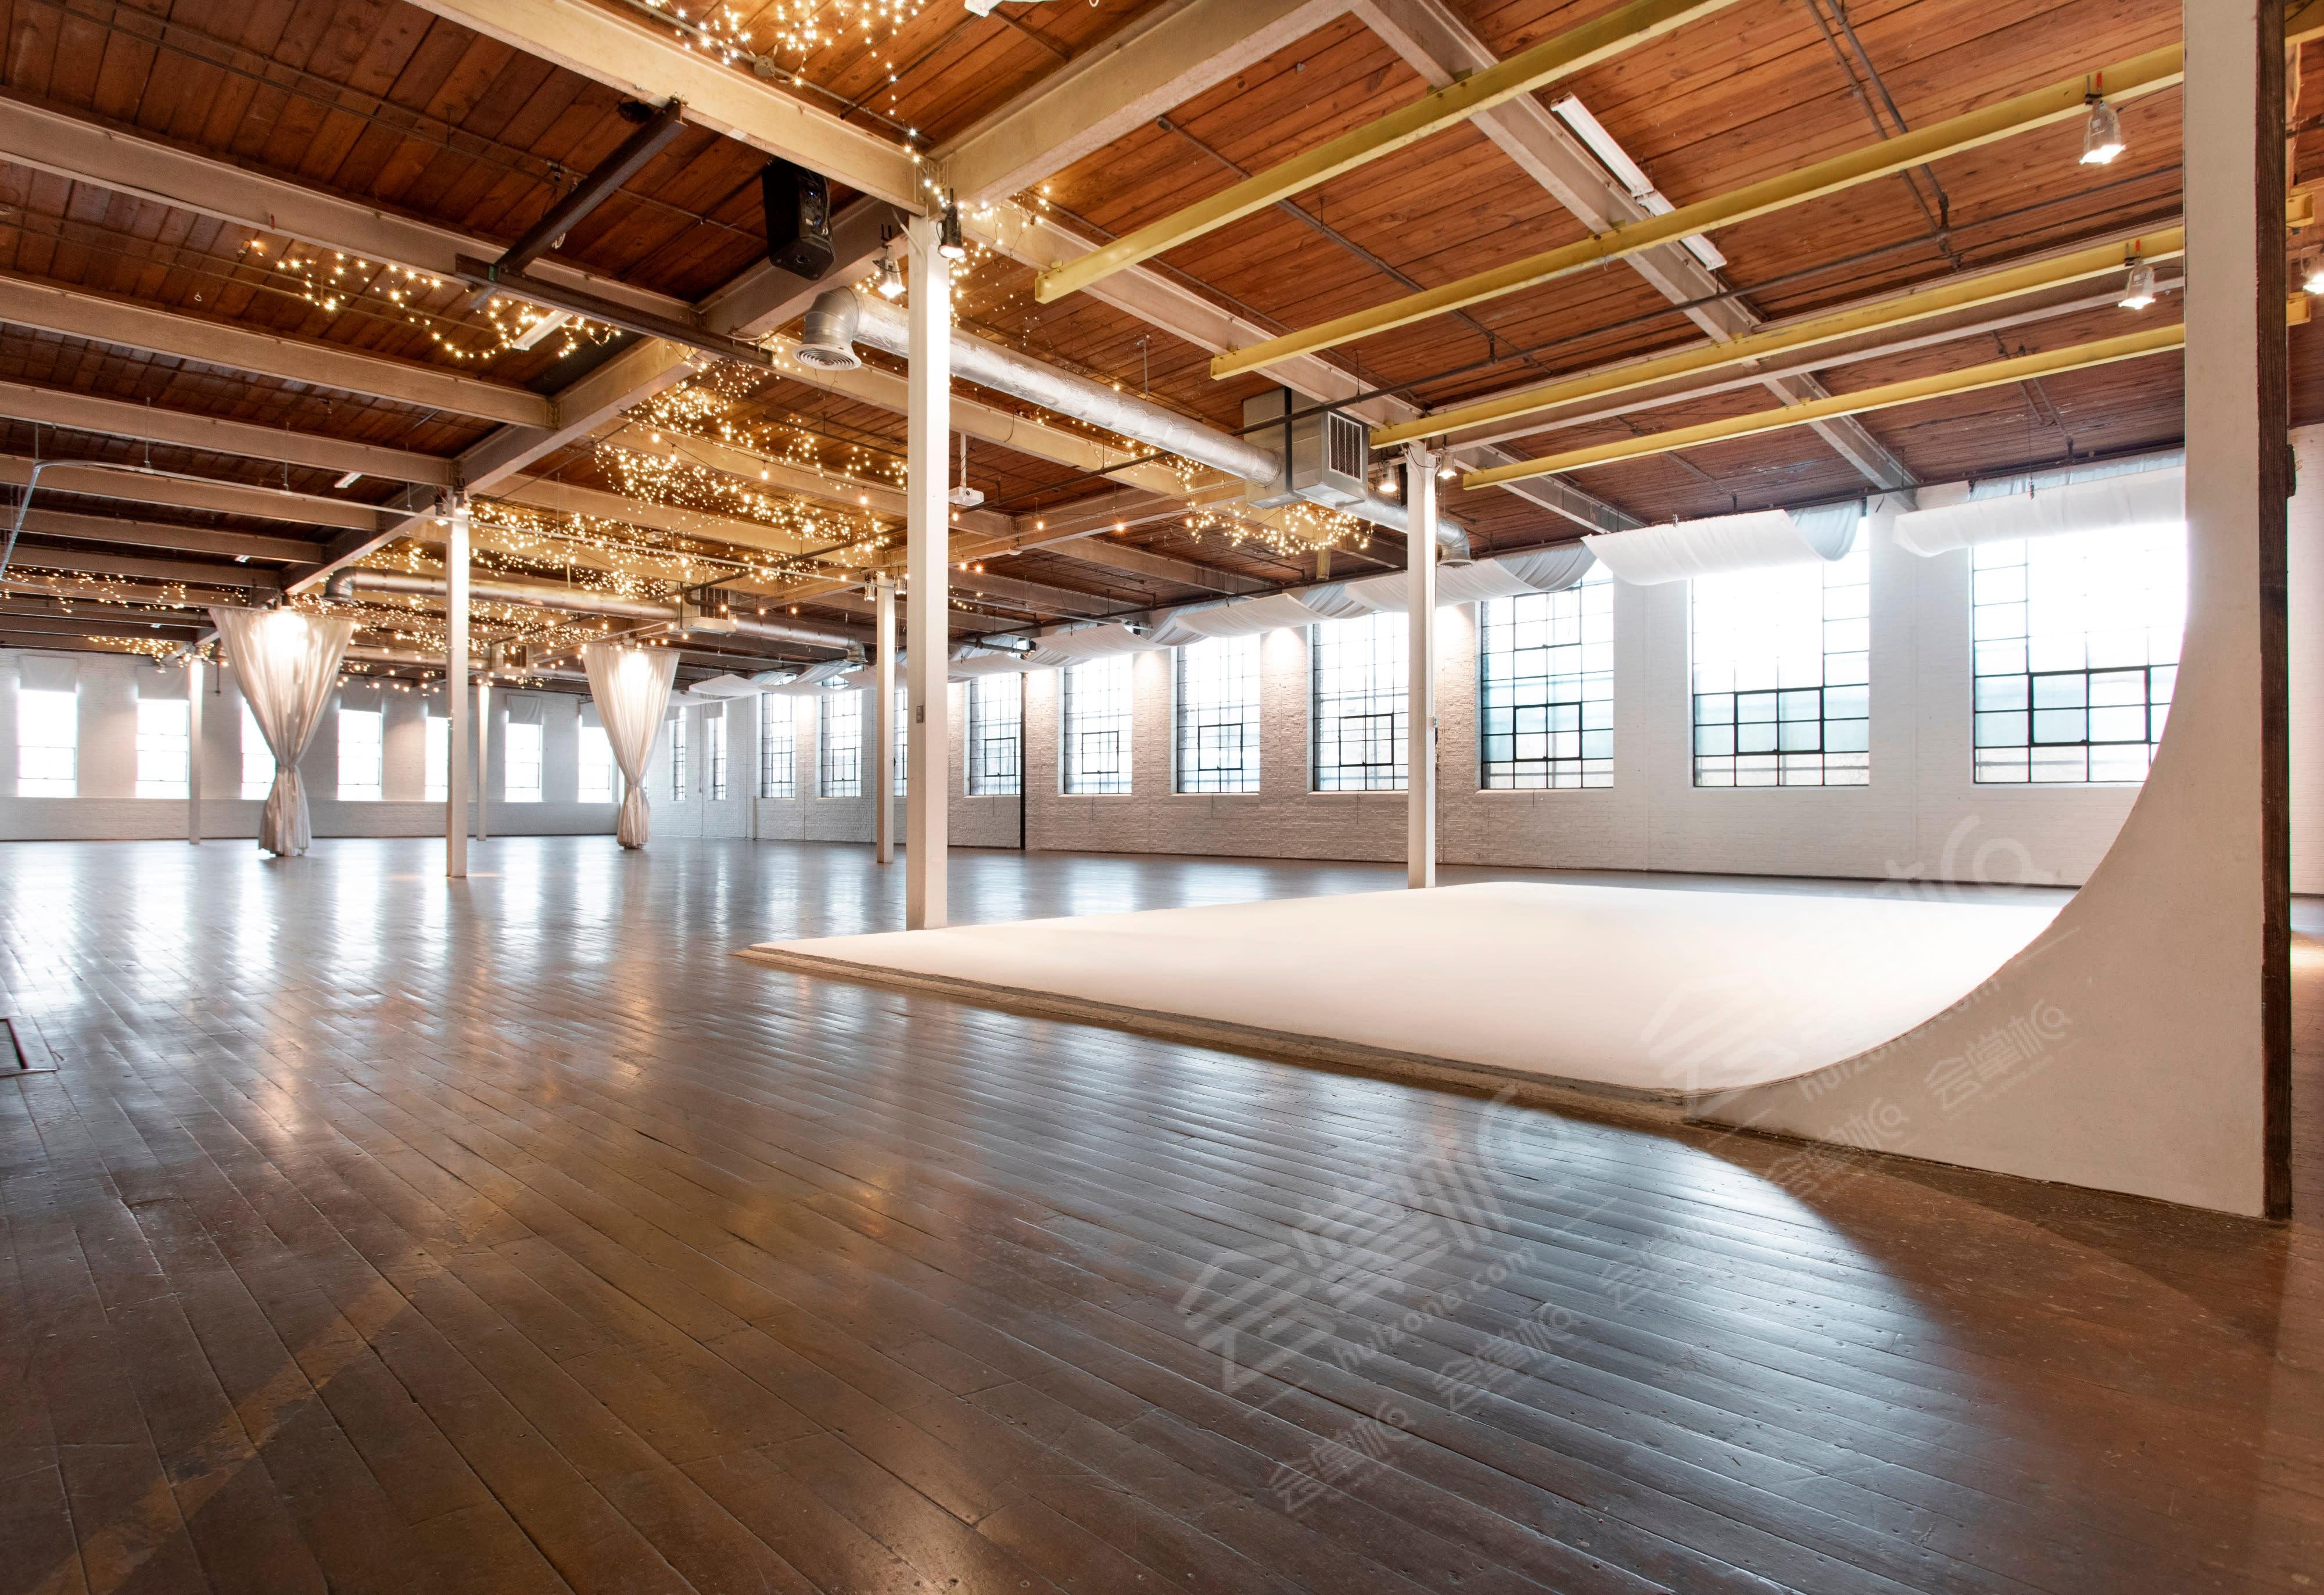 Downtown Historic Factory Complex Turned Film & Photo Studio With Huge Windows